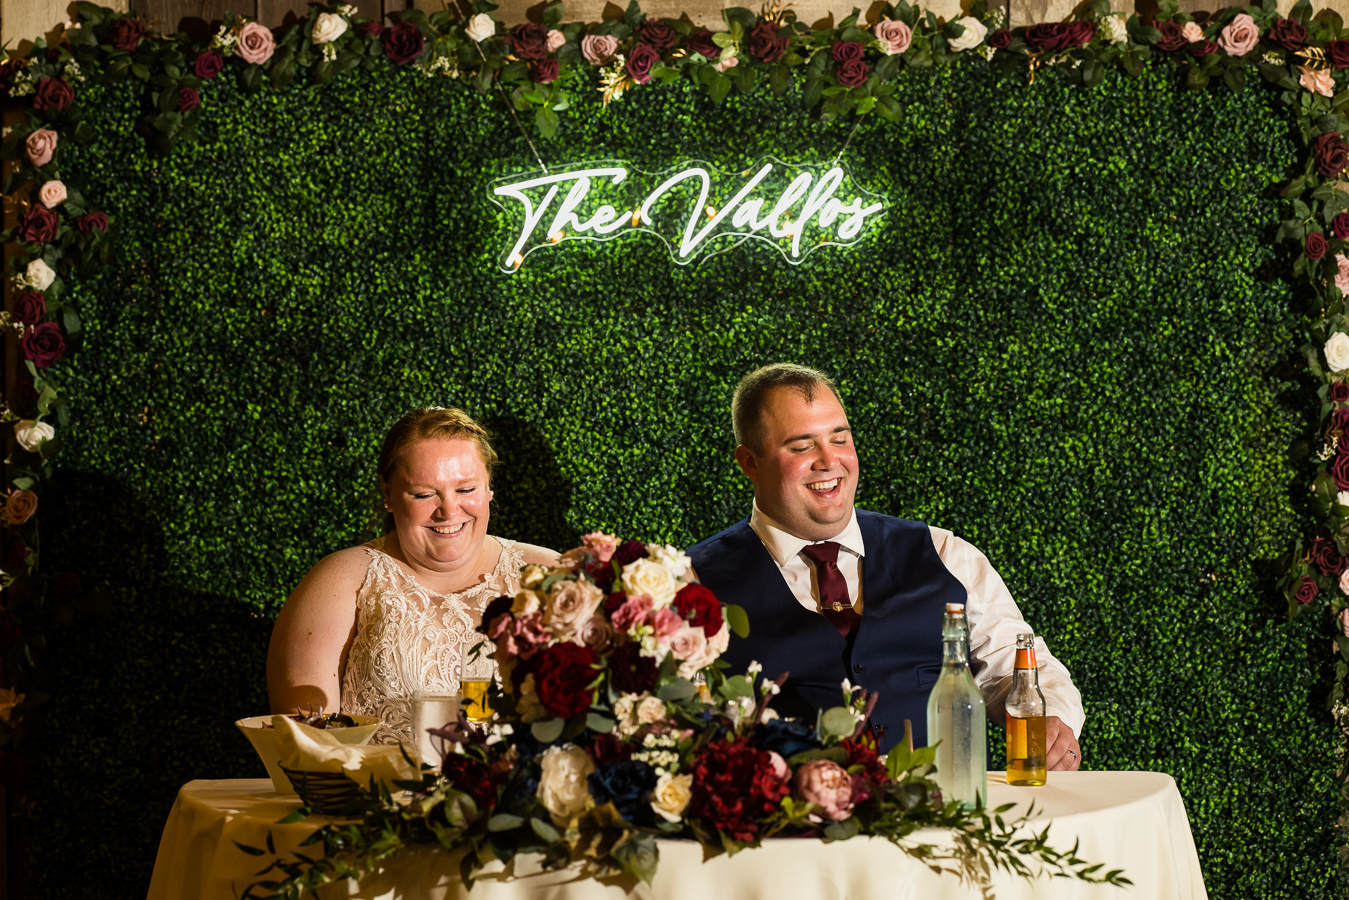 fun, unique greenery wall backdrop with their new last name on a neon sign behind the newlywed couple's sweetheart table